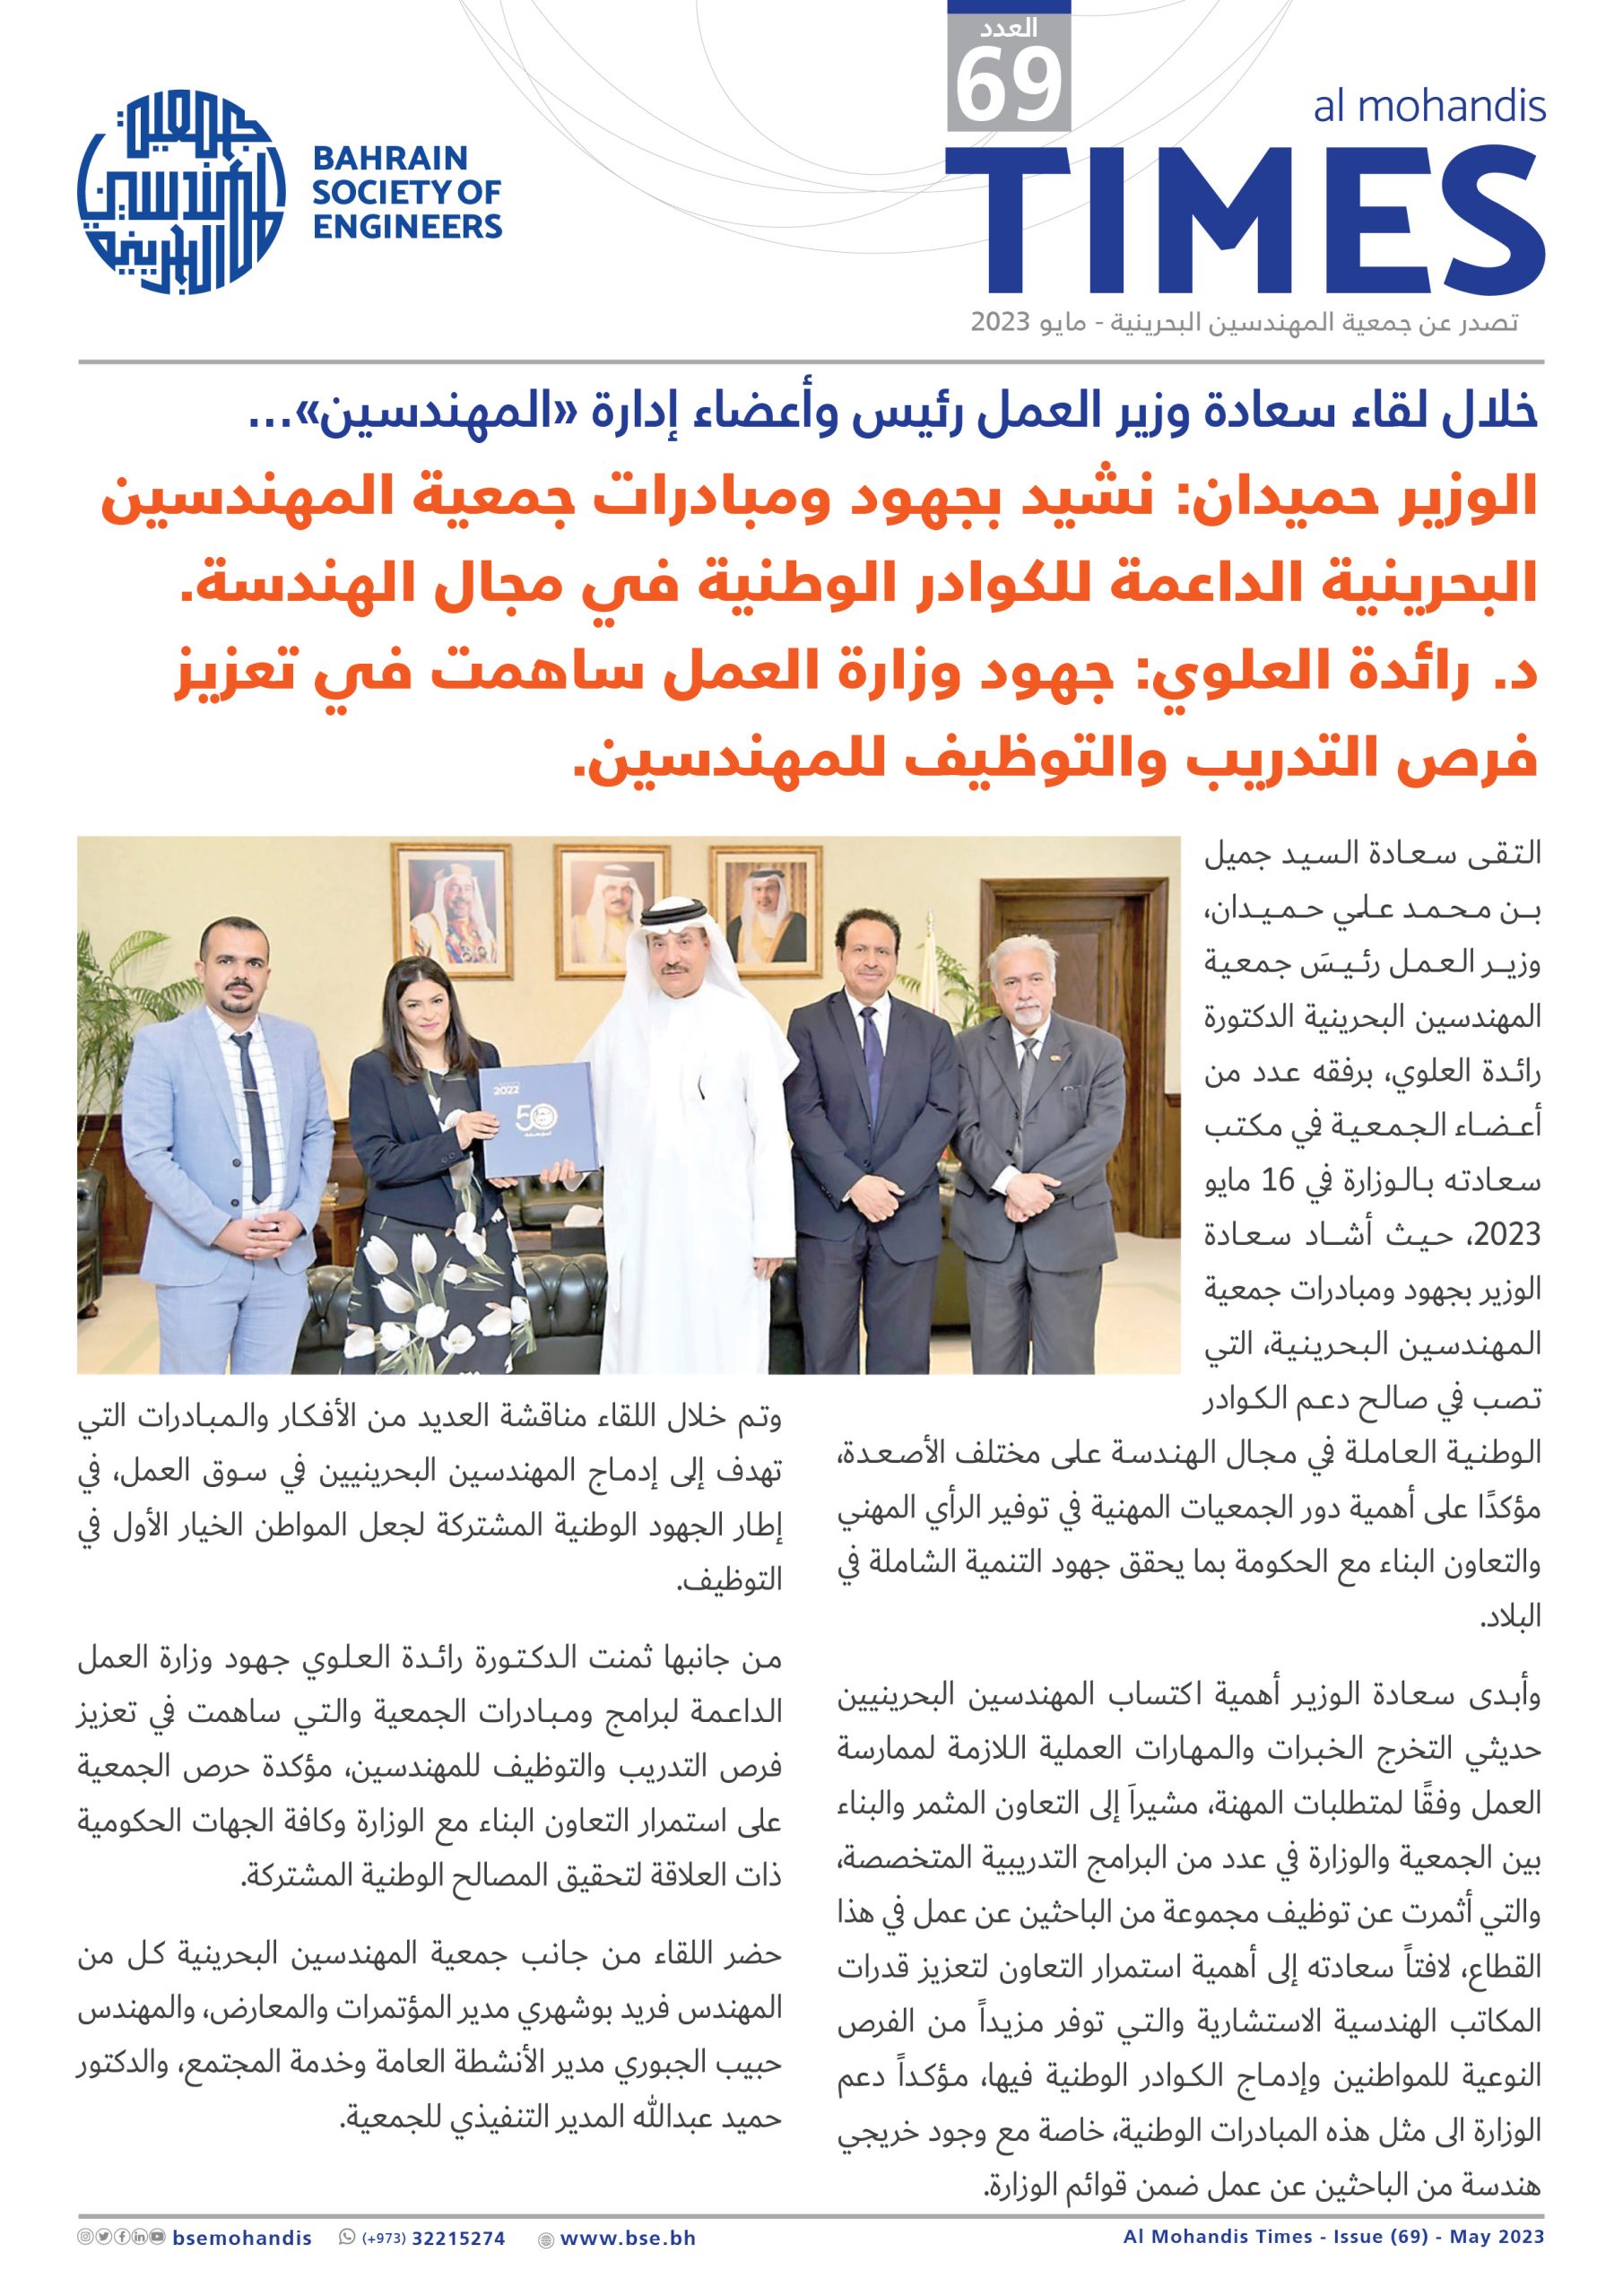 Al Mohandis Times Issue 69